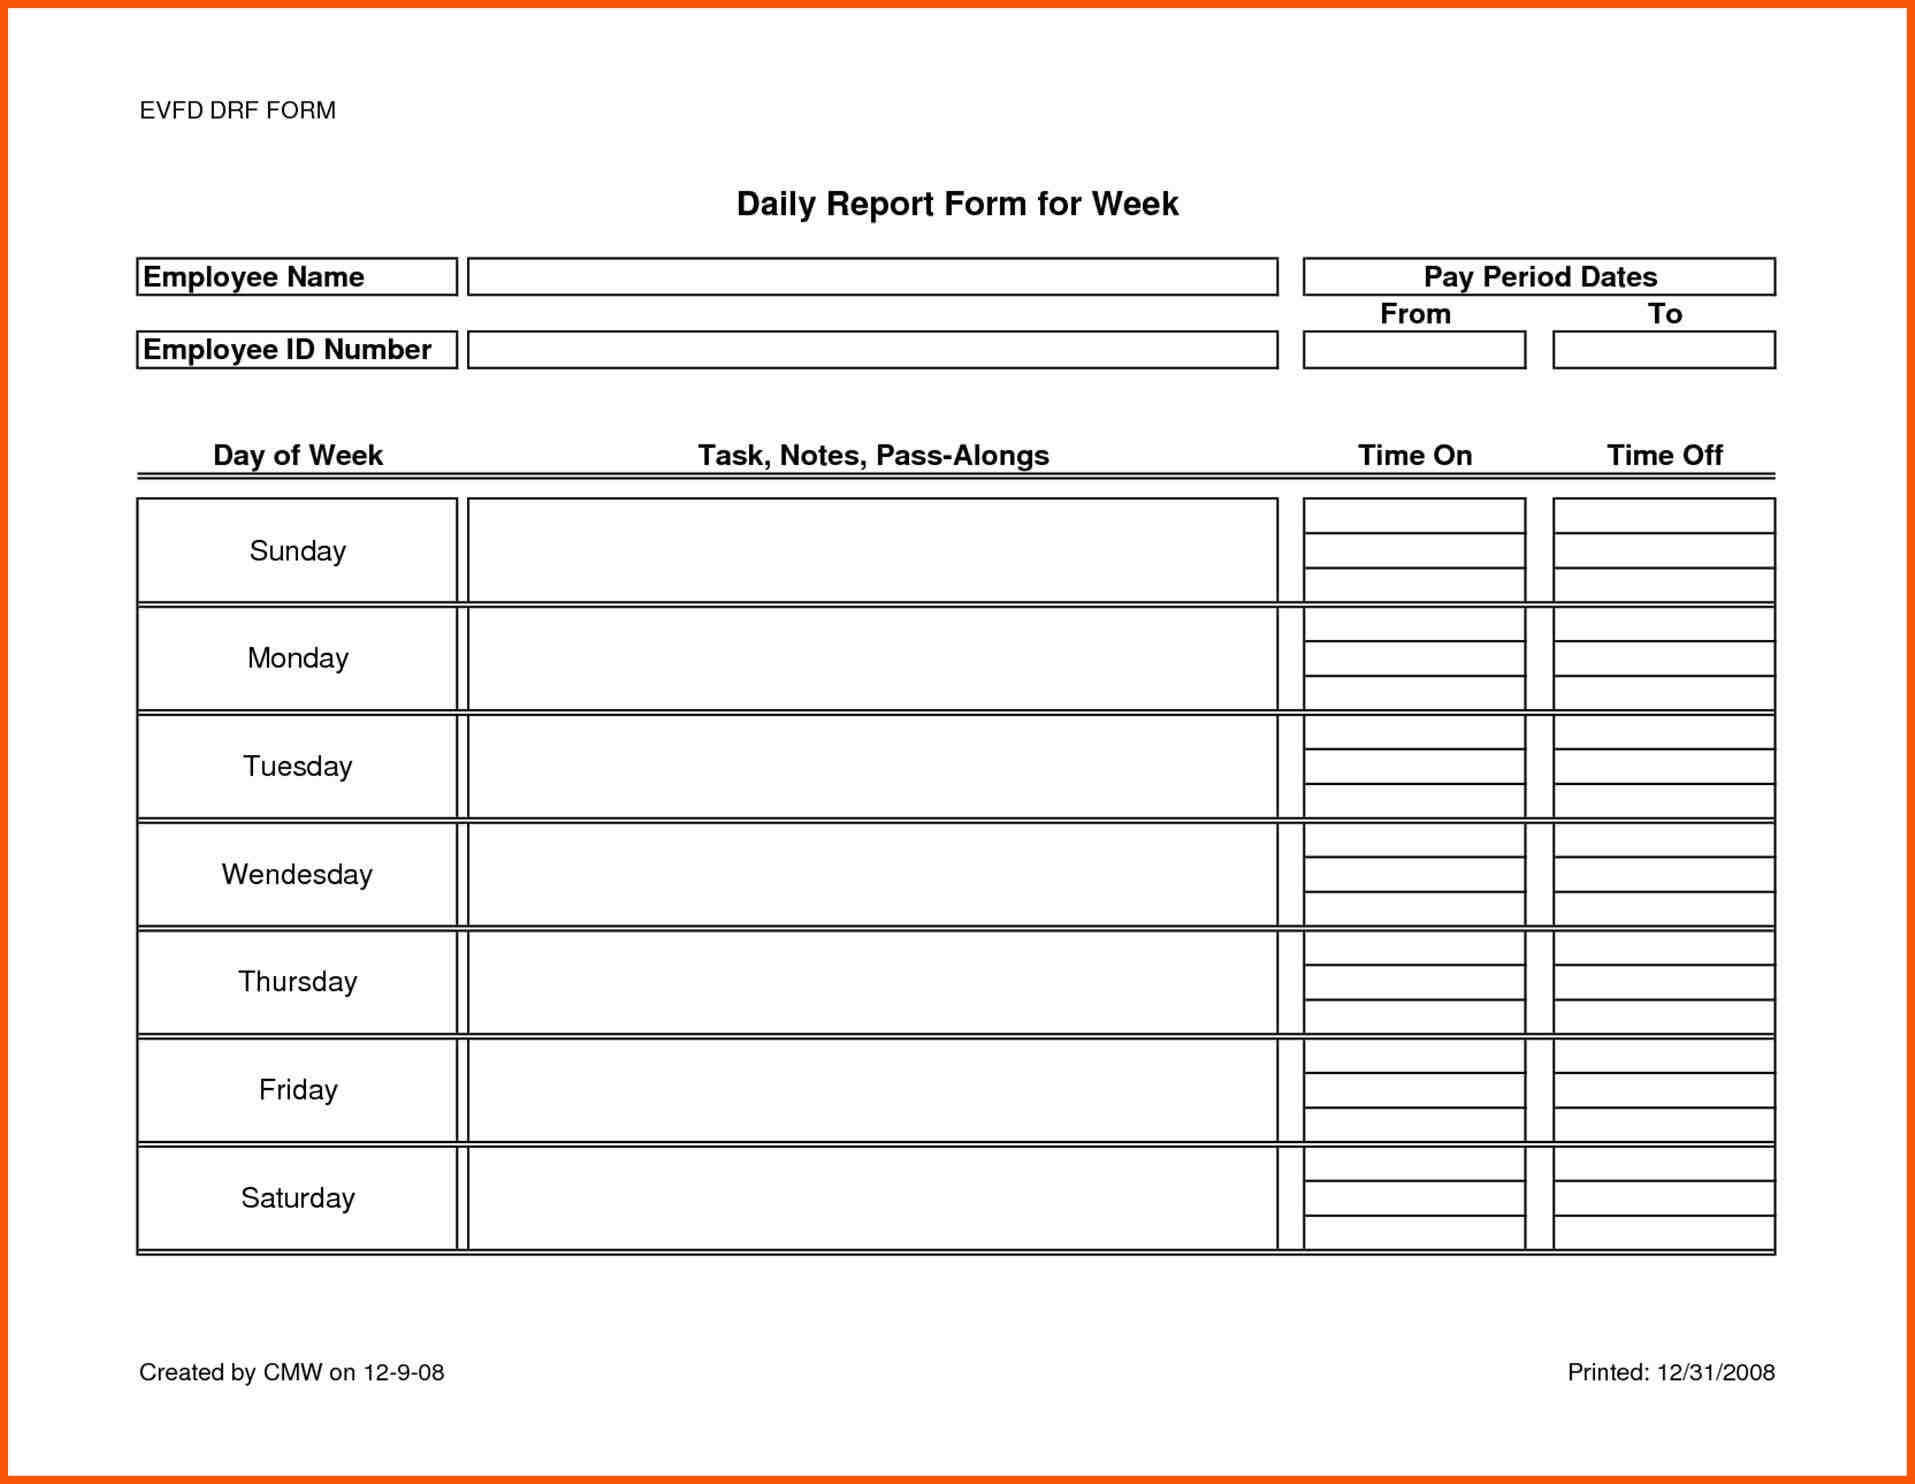 Daily Reporting Format Employees - Magdalene Project Regarding Employee Daily Report Template